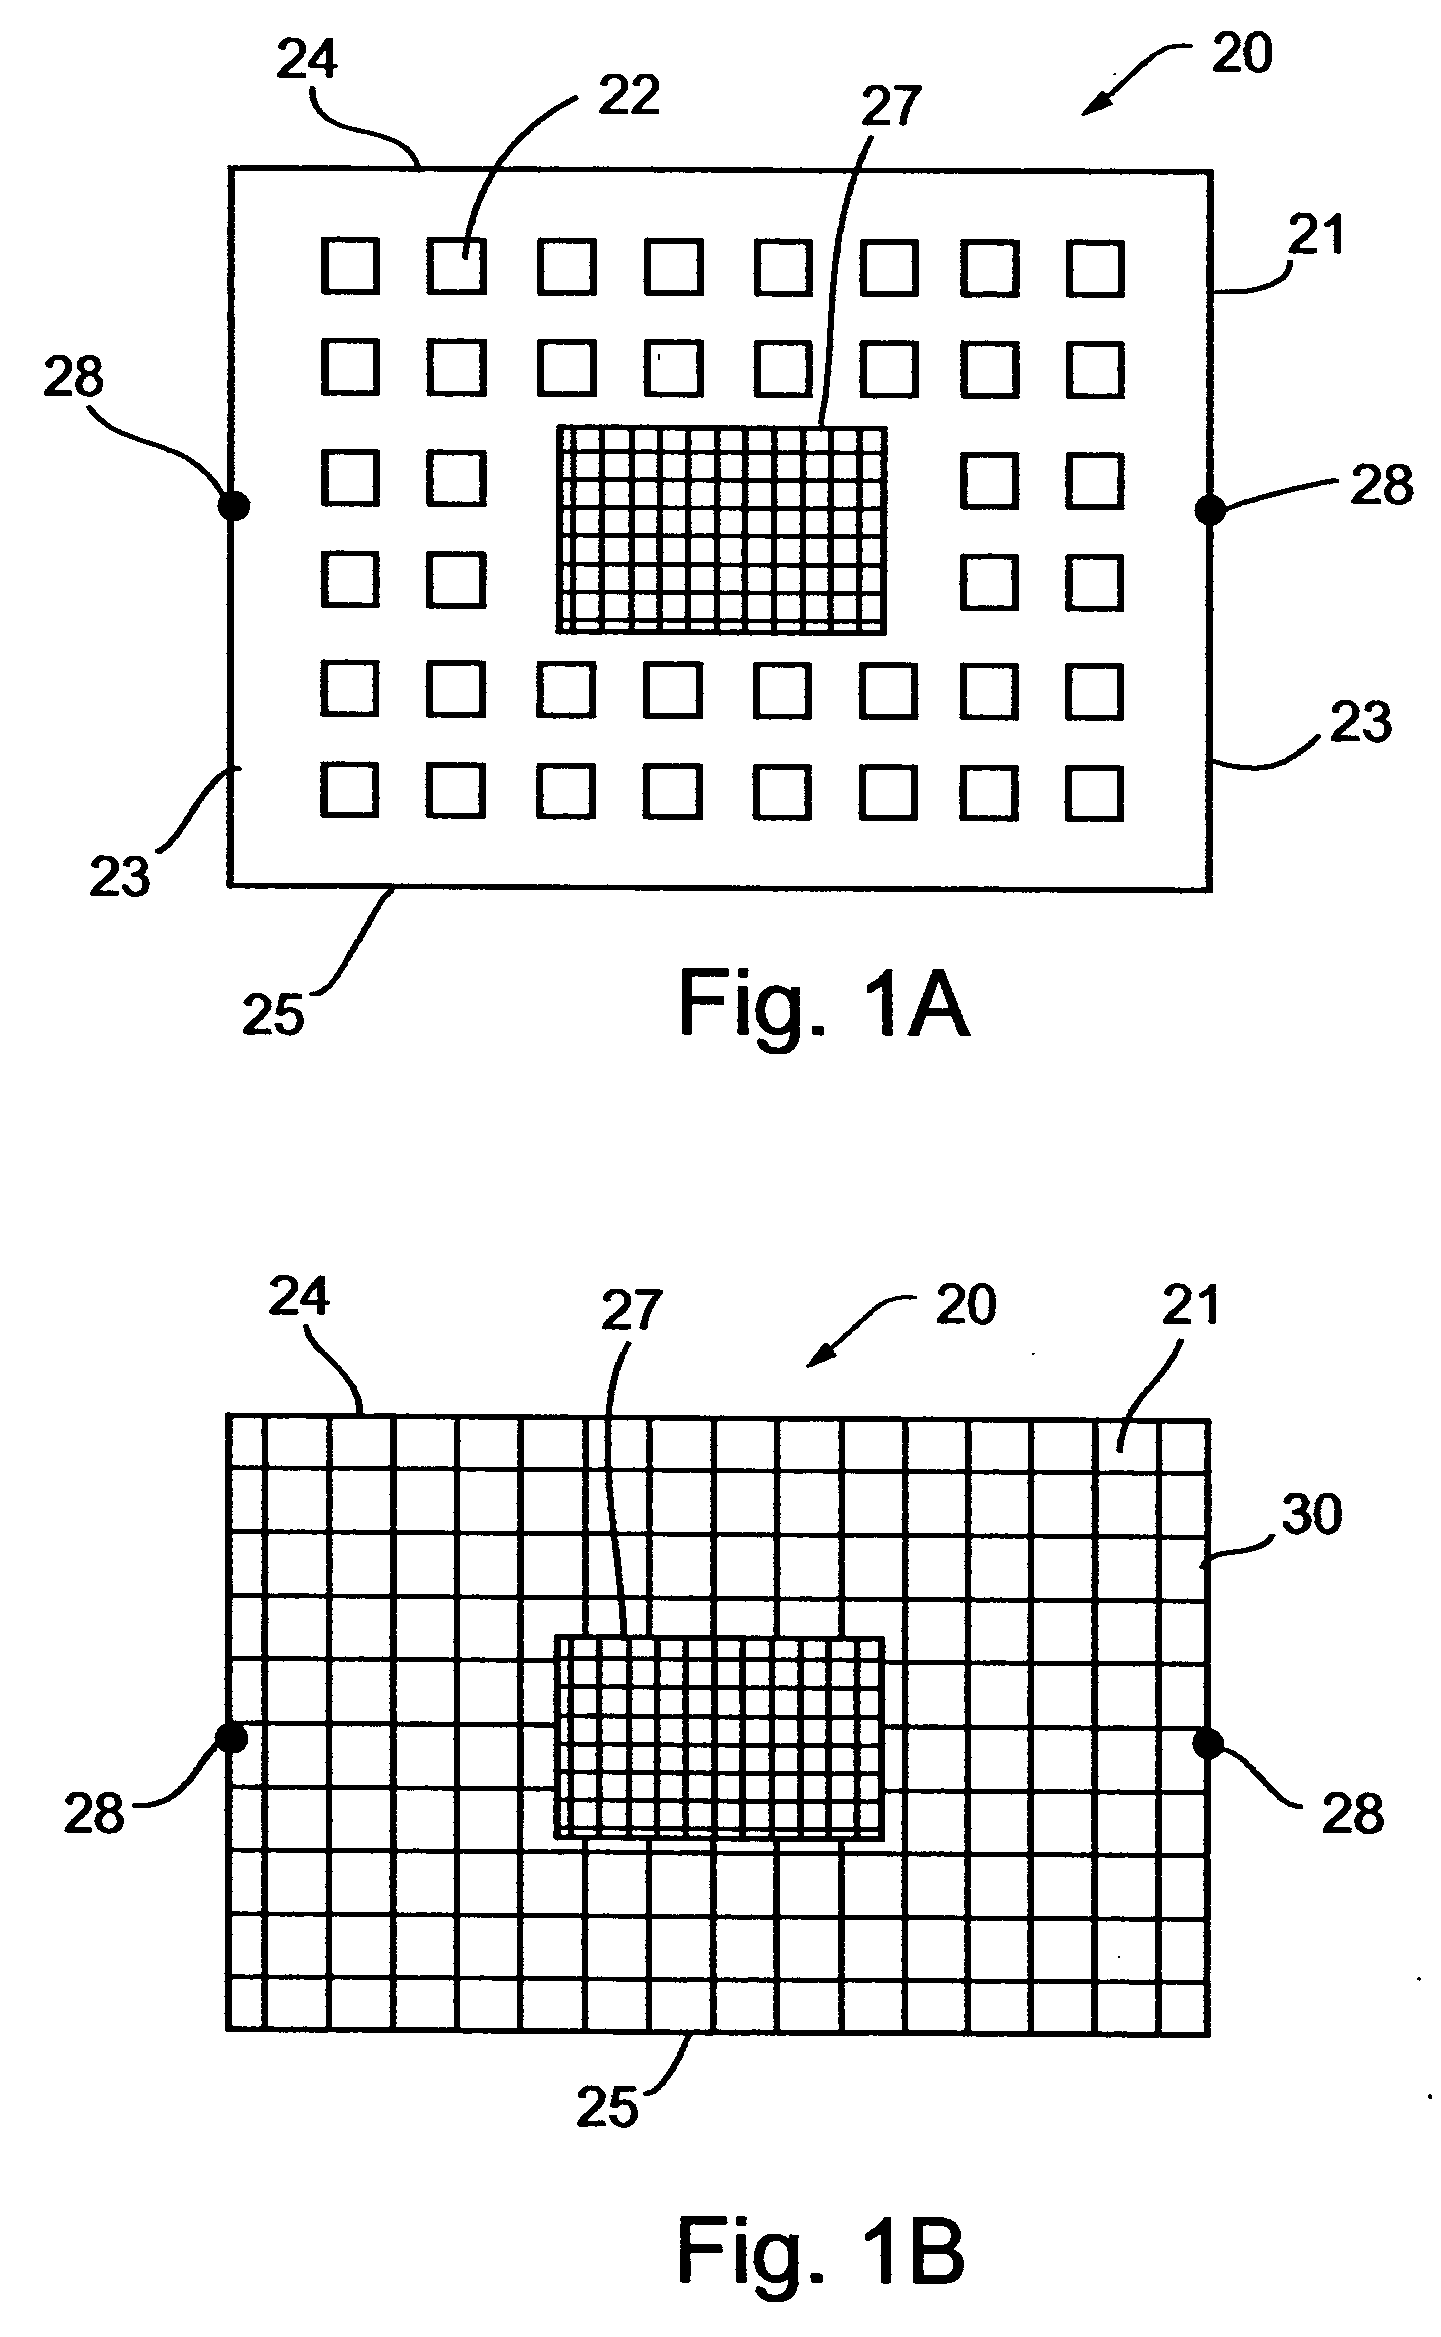 Implantable integral device and corresponding method for deflecting embolic material in blood flowing at an arterial bifurcation